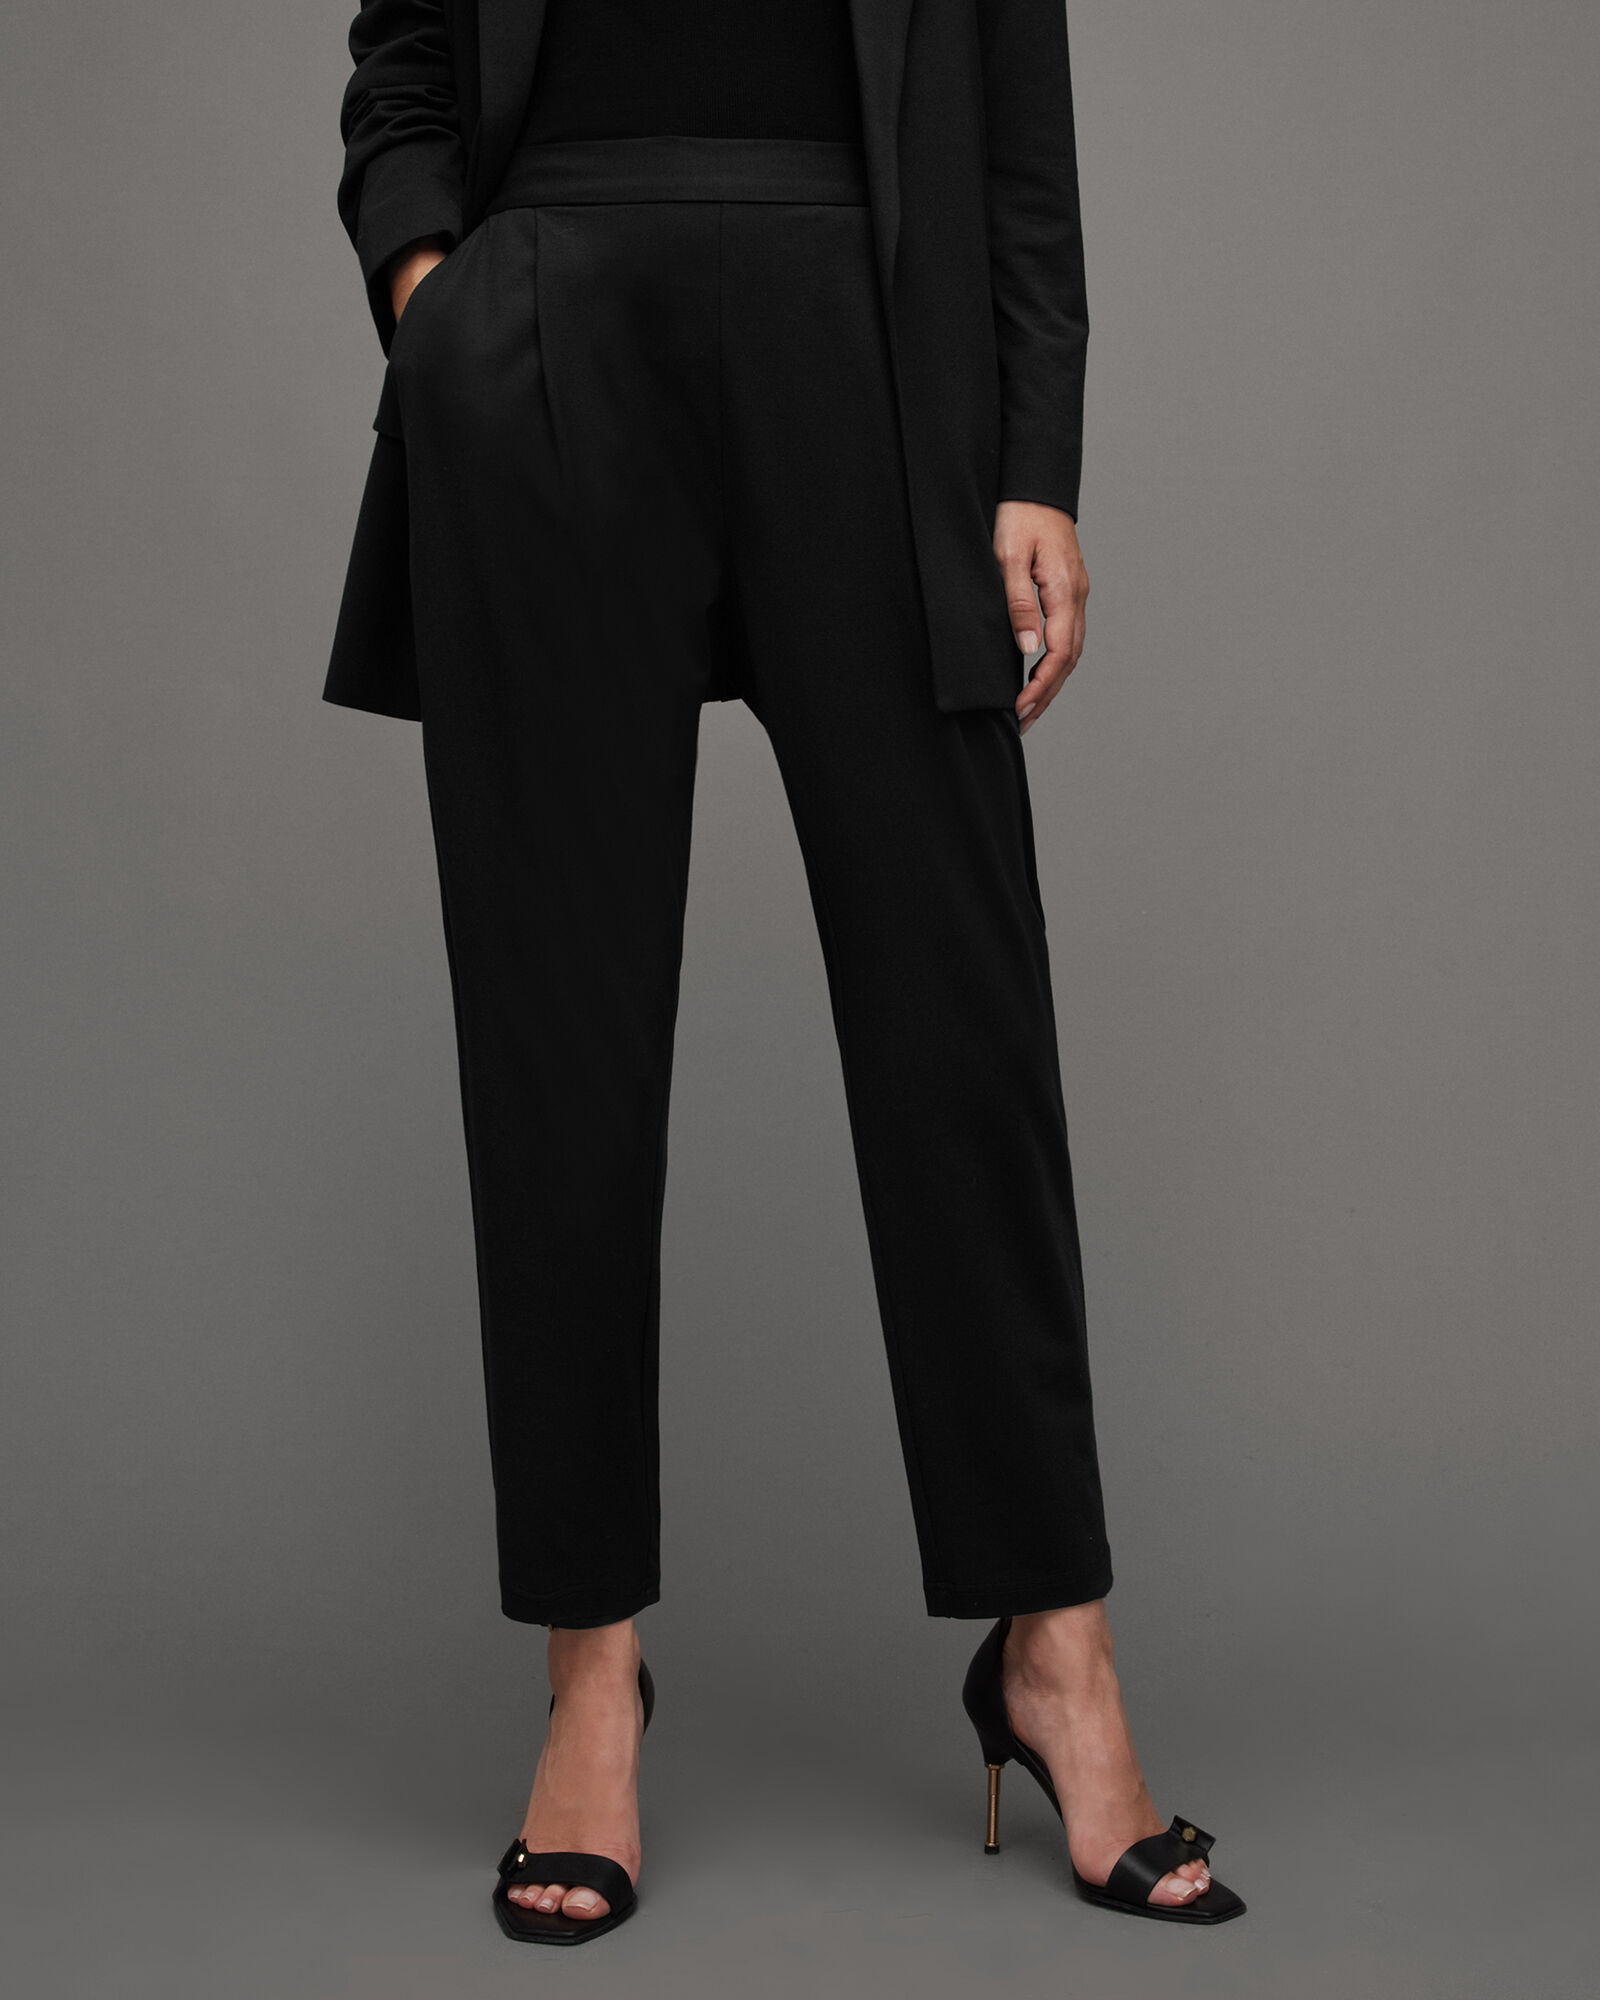 Crepe Womens Stretchy Tapered Fit Salon Trousers Black  SHOP ALL  WORKWEAR from Simon Jersey UK